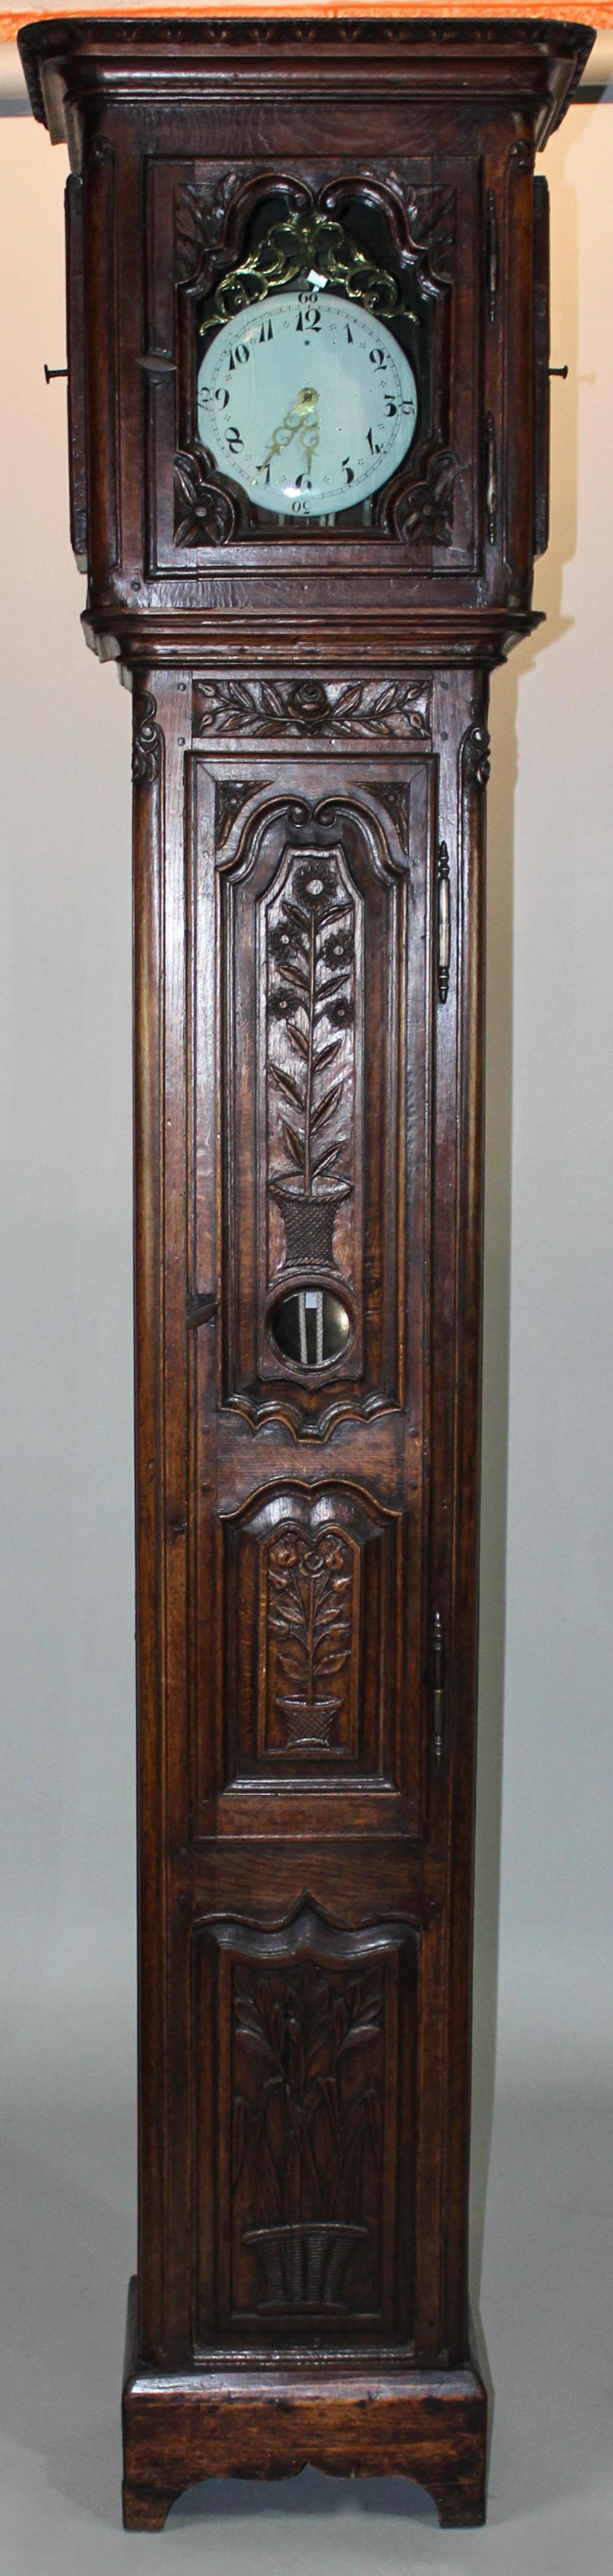 FRENCH PROVINCIAL CARVED OAK TALL 313d9e